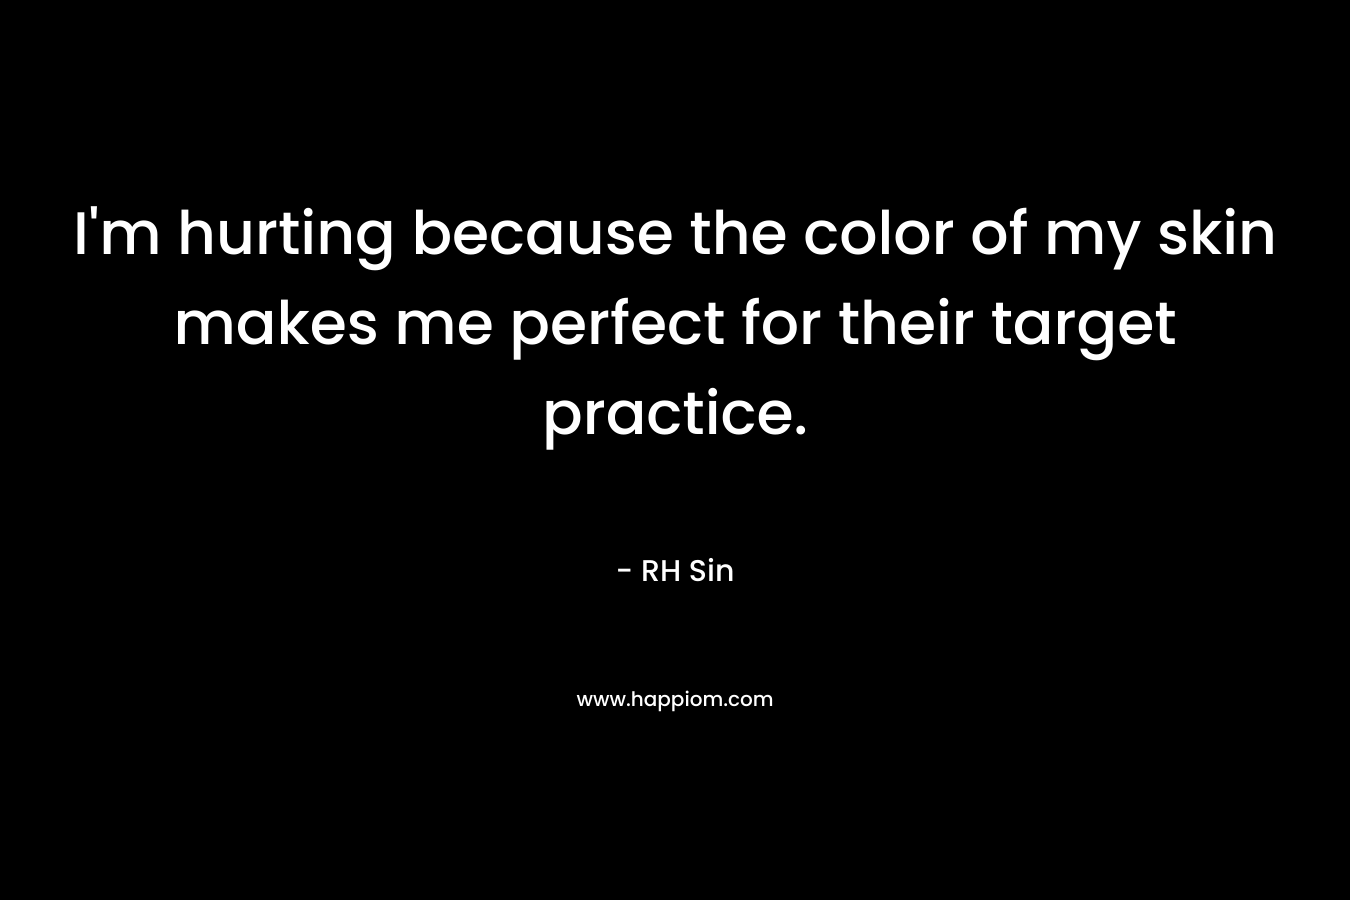 I'm hurting because the color of my skin makes me perfect for their target practice.